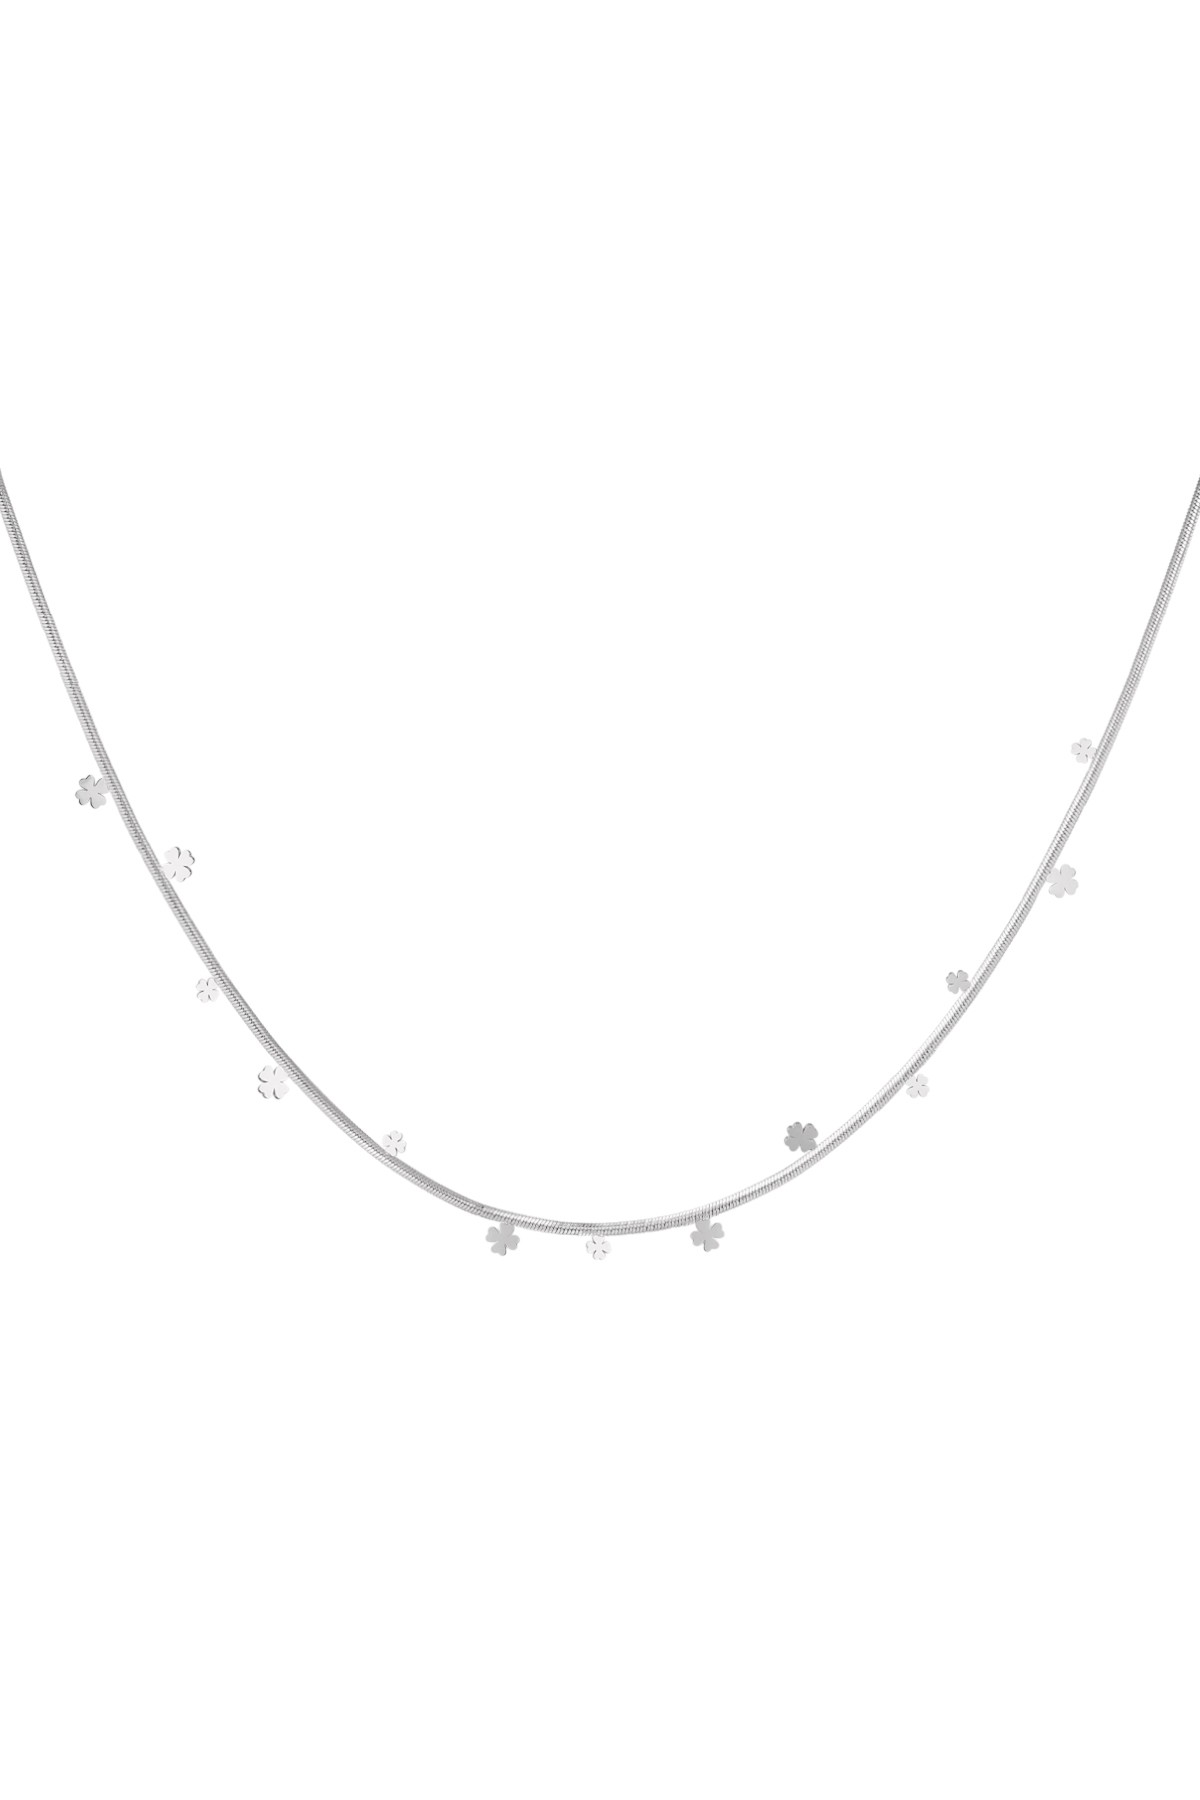 Clover party necklace - silver